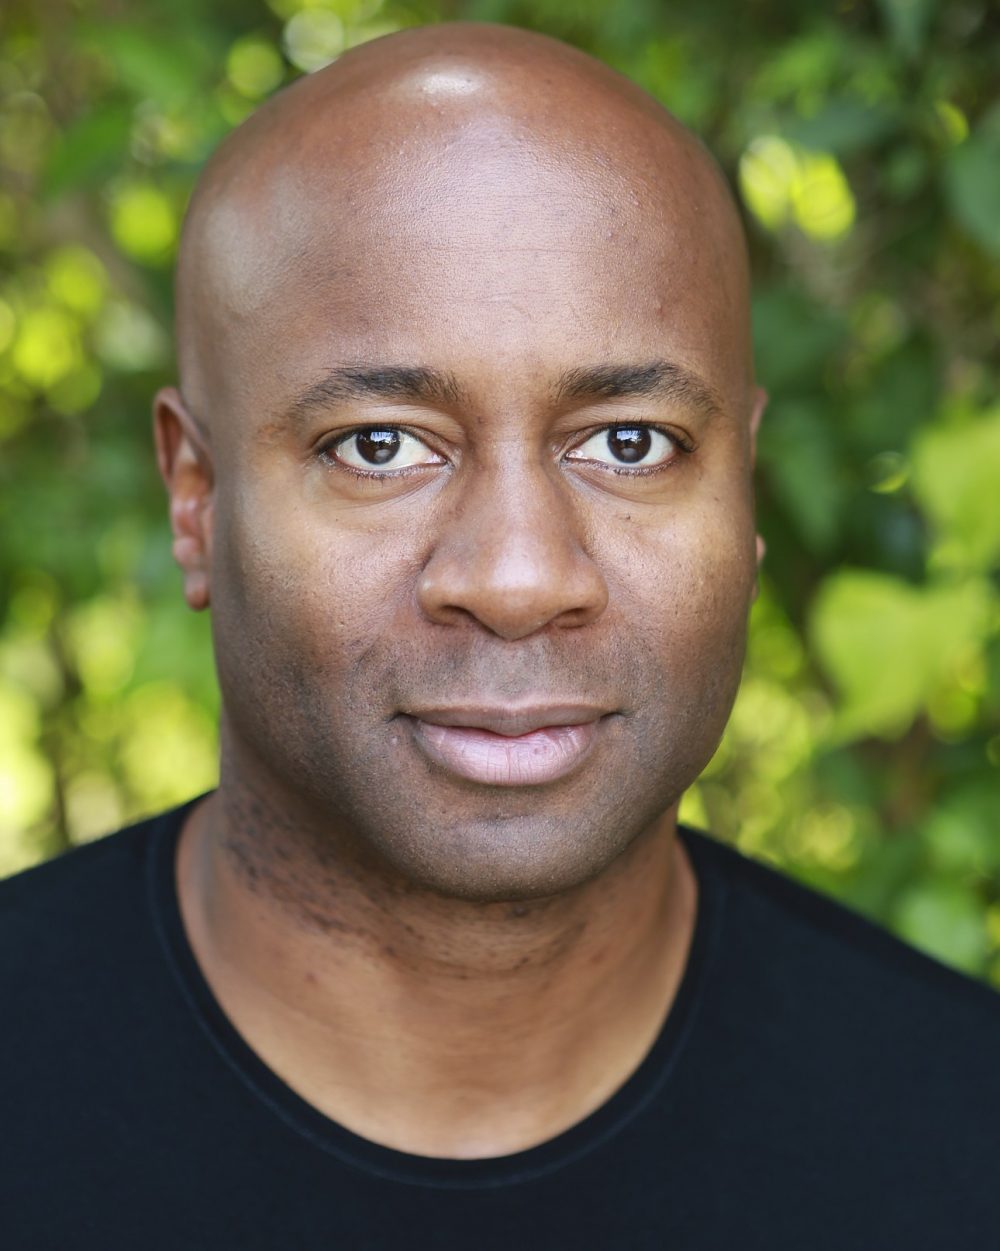 Nicholas Bailey will play Patterson